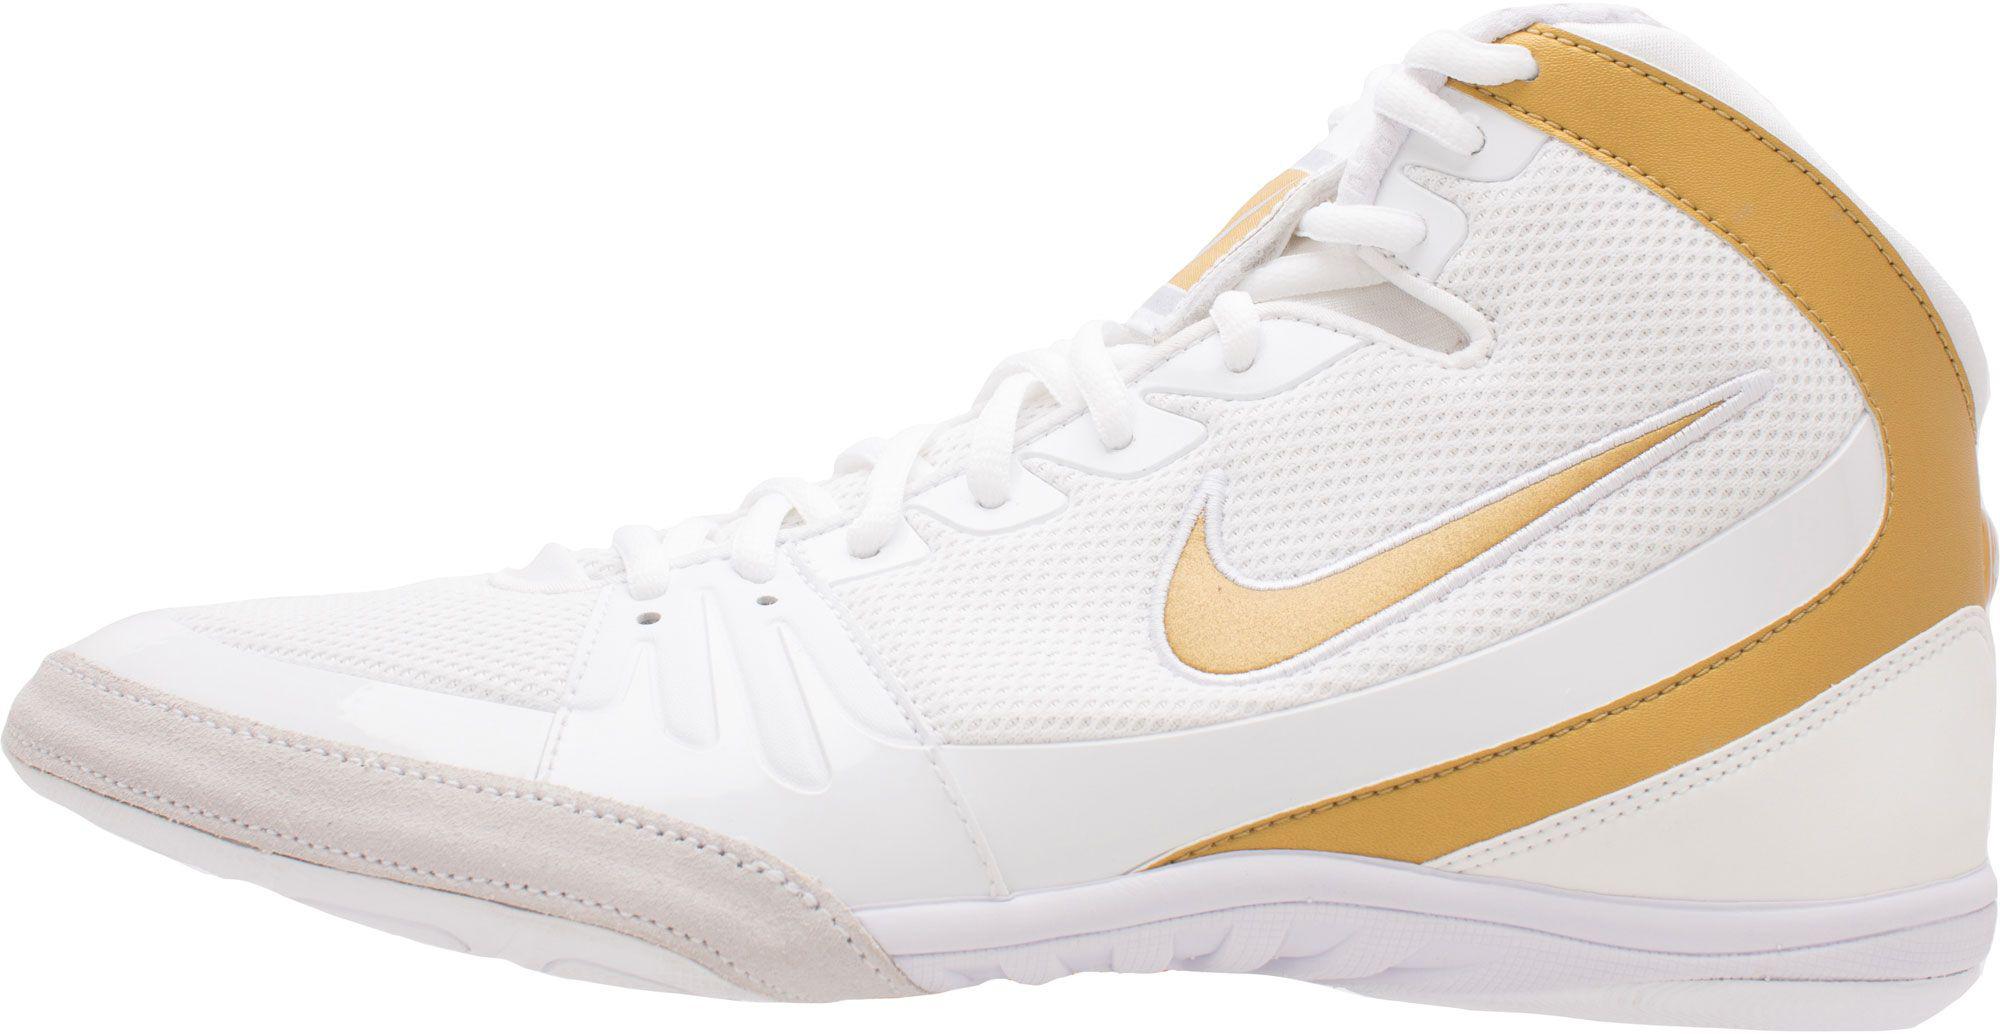 white and gold nike shoes